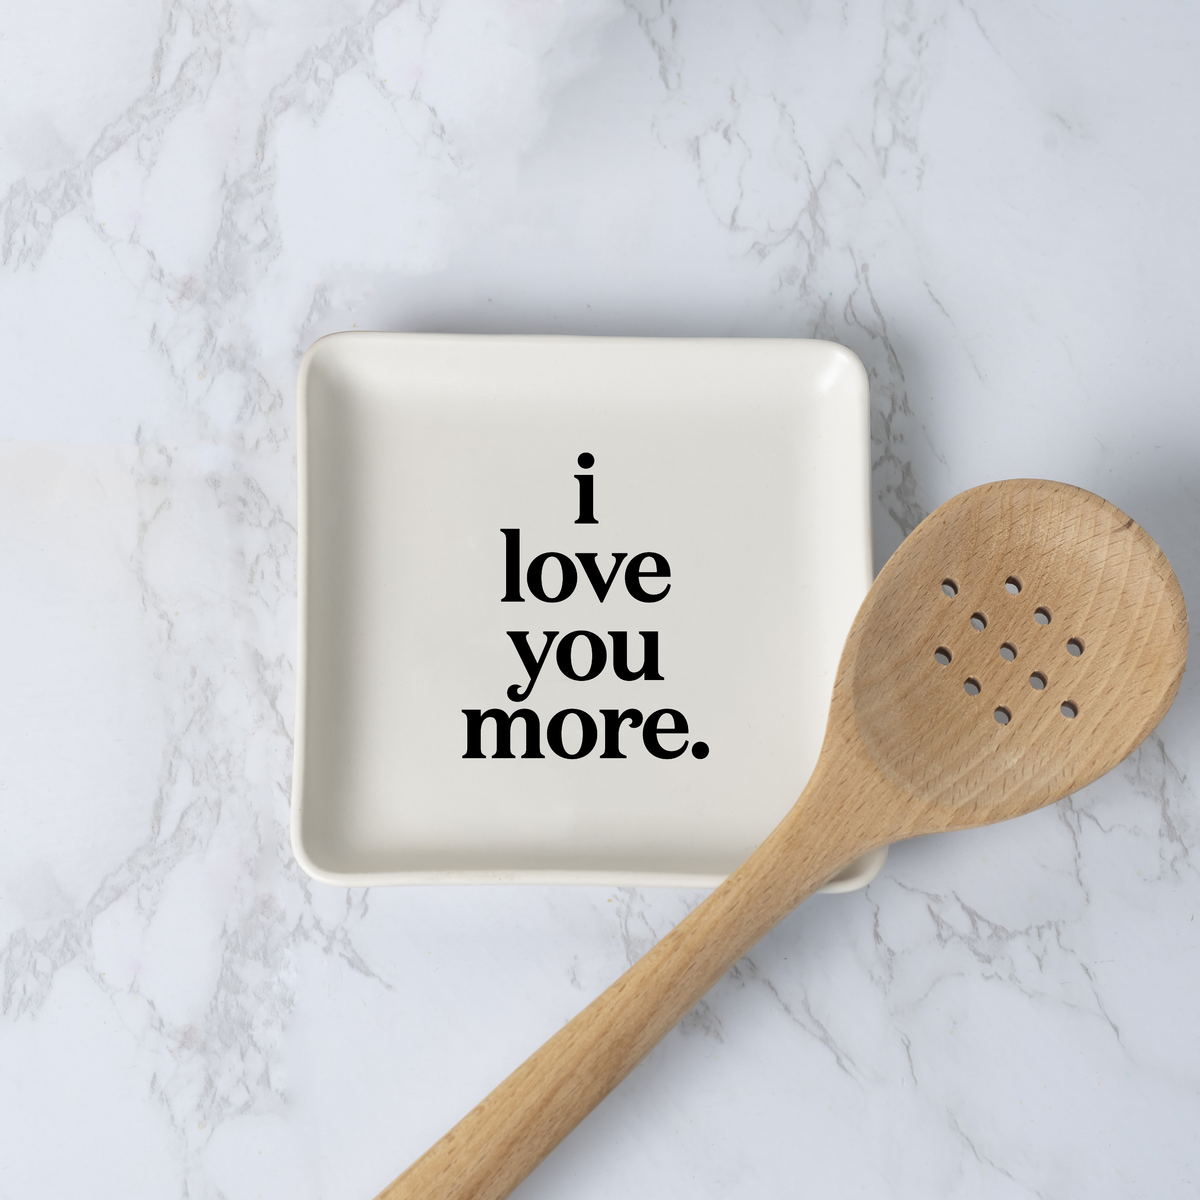 Trinket Dishes - TR344 - I Love You More (Saying)